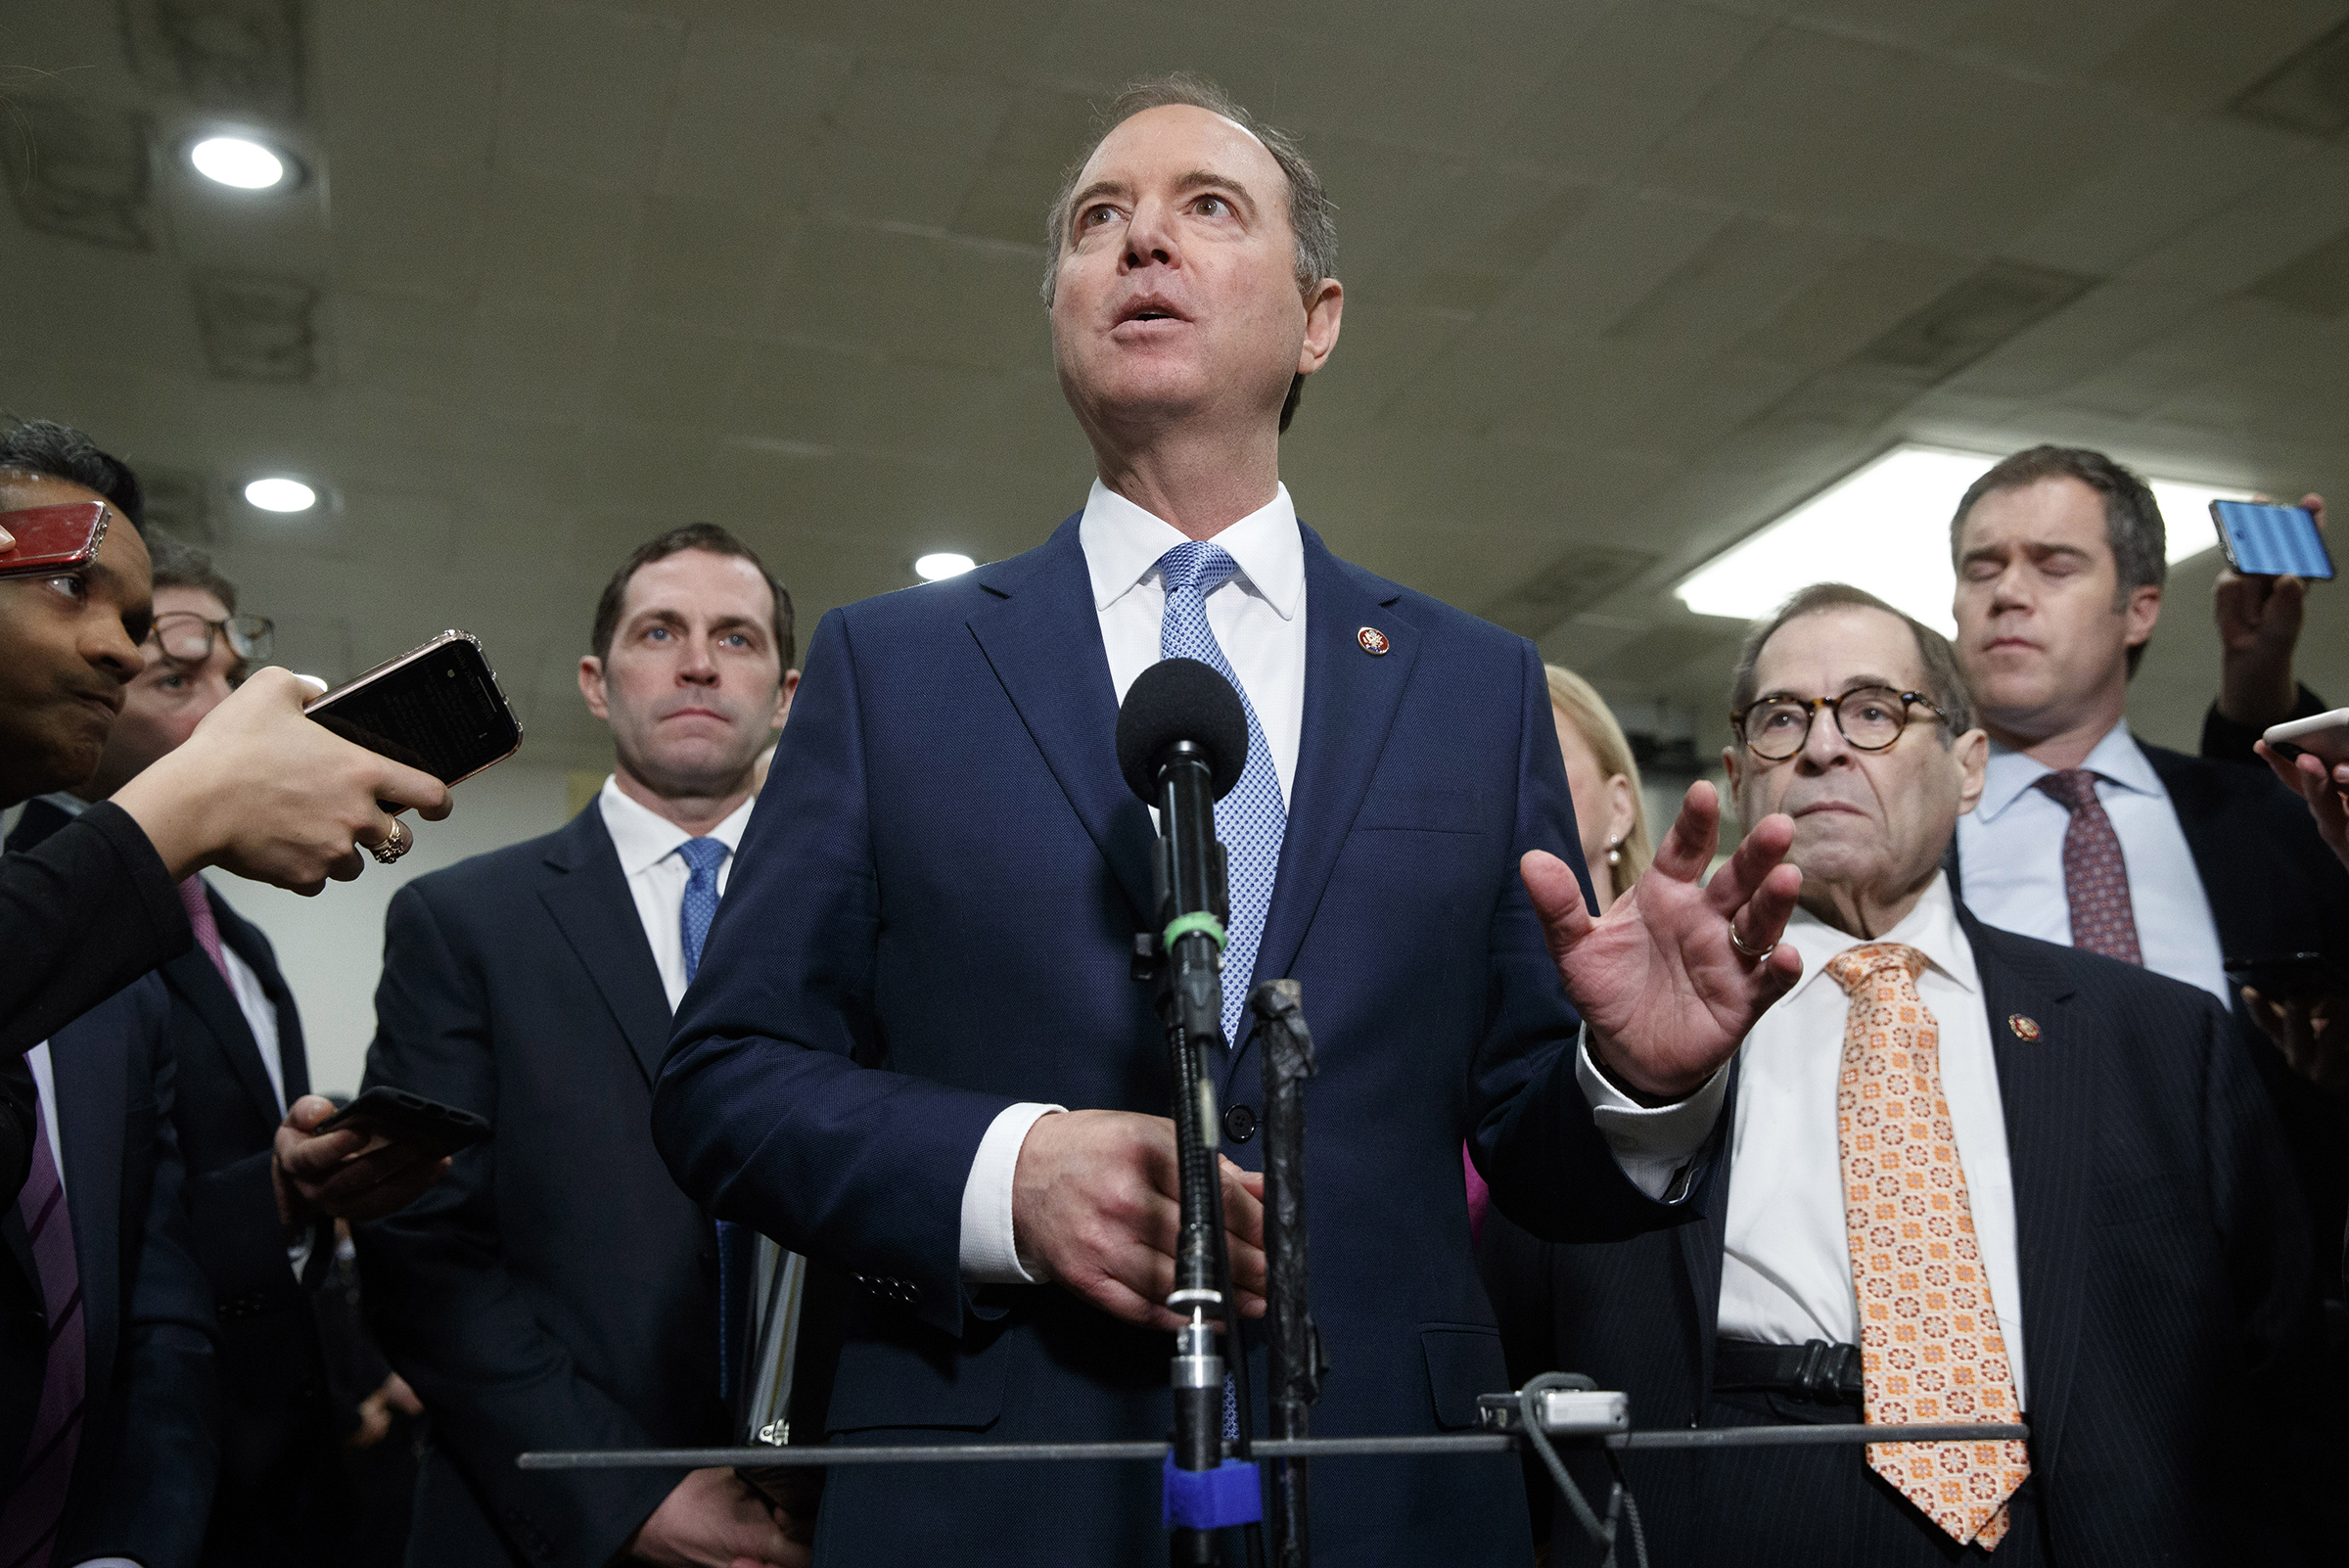 House Democratic impeachment managers including House Intelligence Committee Chairman Adam Schiff, D-Calif., center, with Rep. Jason Crow, D-Colo., left, and Judiciary Committee Chairman Jerrold Nadler, D-N.Y., speak to the media before attending the fourth day of the impeachment trial of President Donald Trump on Jan. 24, 2020 in Washington. (Jacquelyn Martin—AP)